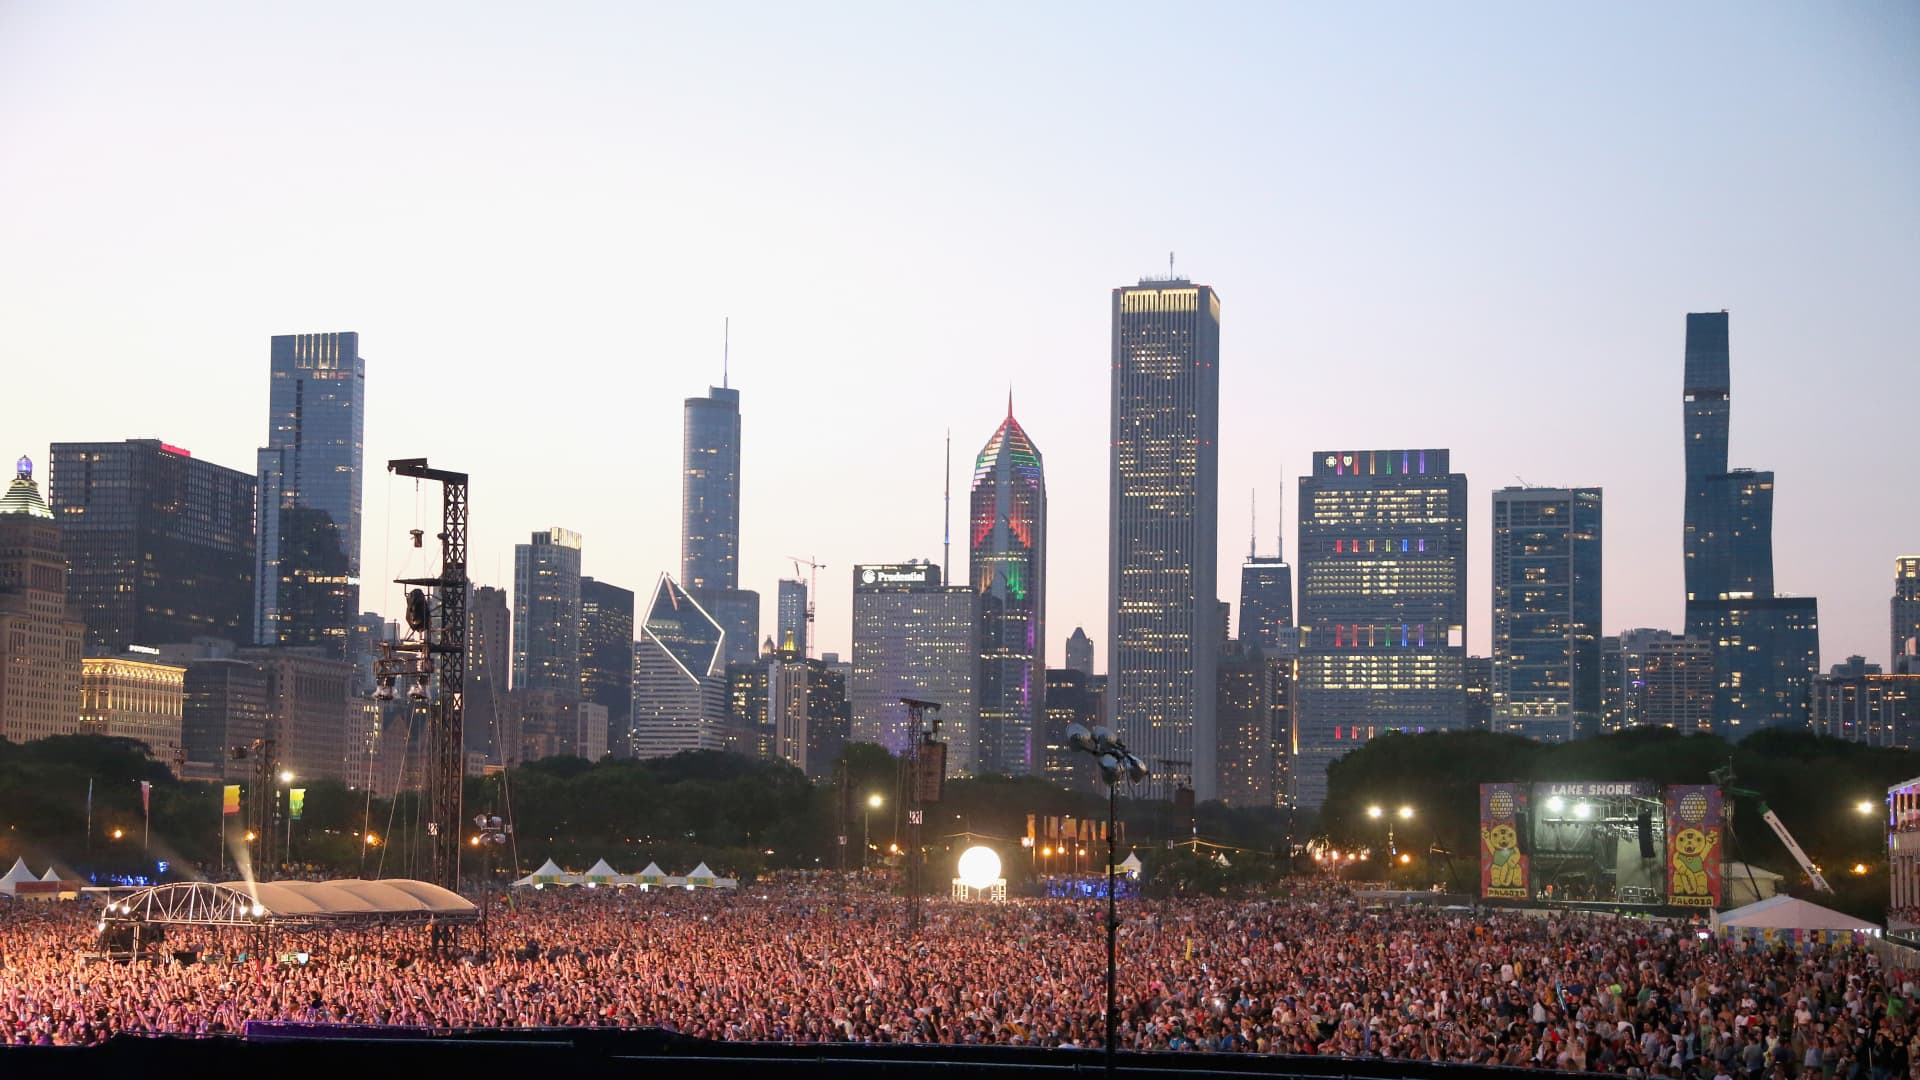 CHICAGO, IL - AUGUST 01:A view of the audience as the Foo Fighters perform on the last day of Lollapalooza at Grant Park on August 1, 2021 in Chicago, Illinois.(Photo by Gary Miller/FilmMagic)